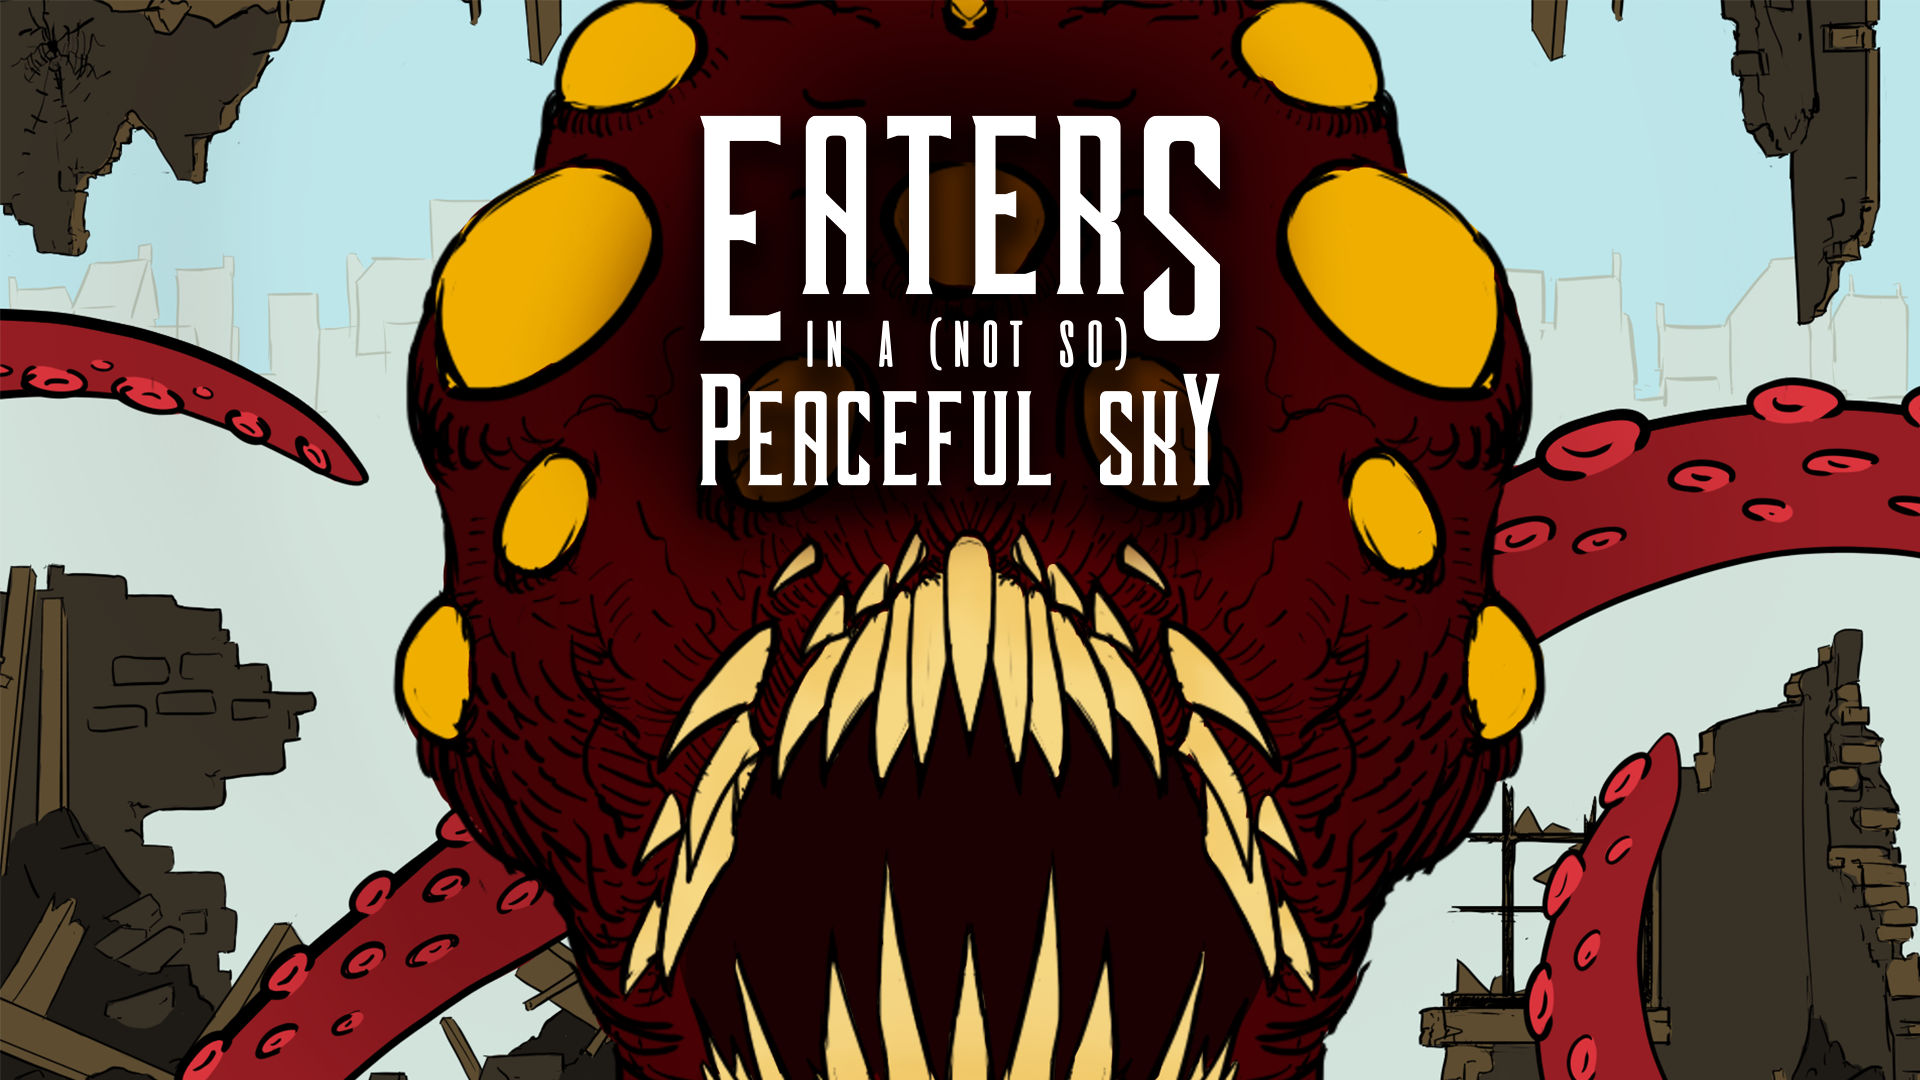 Eaters in a (not so) peaceful sky